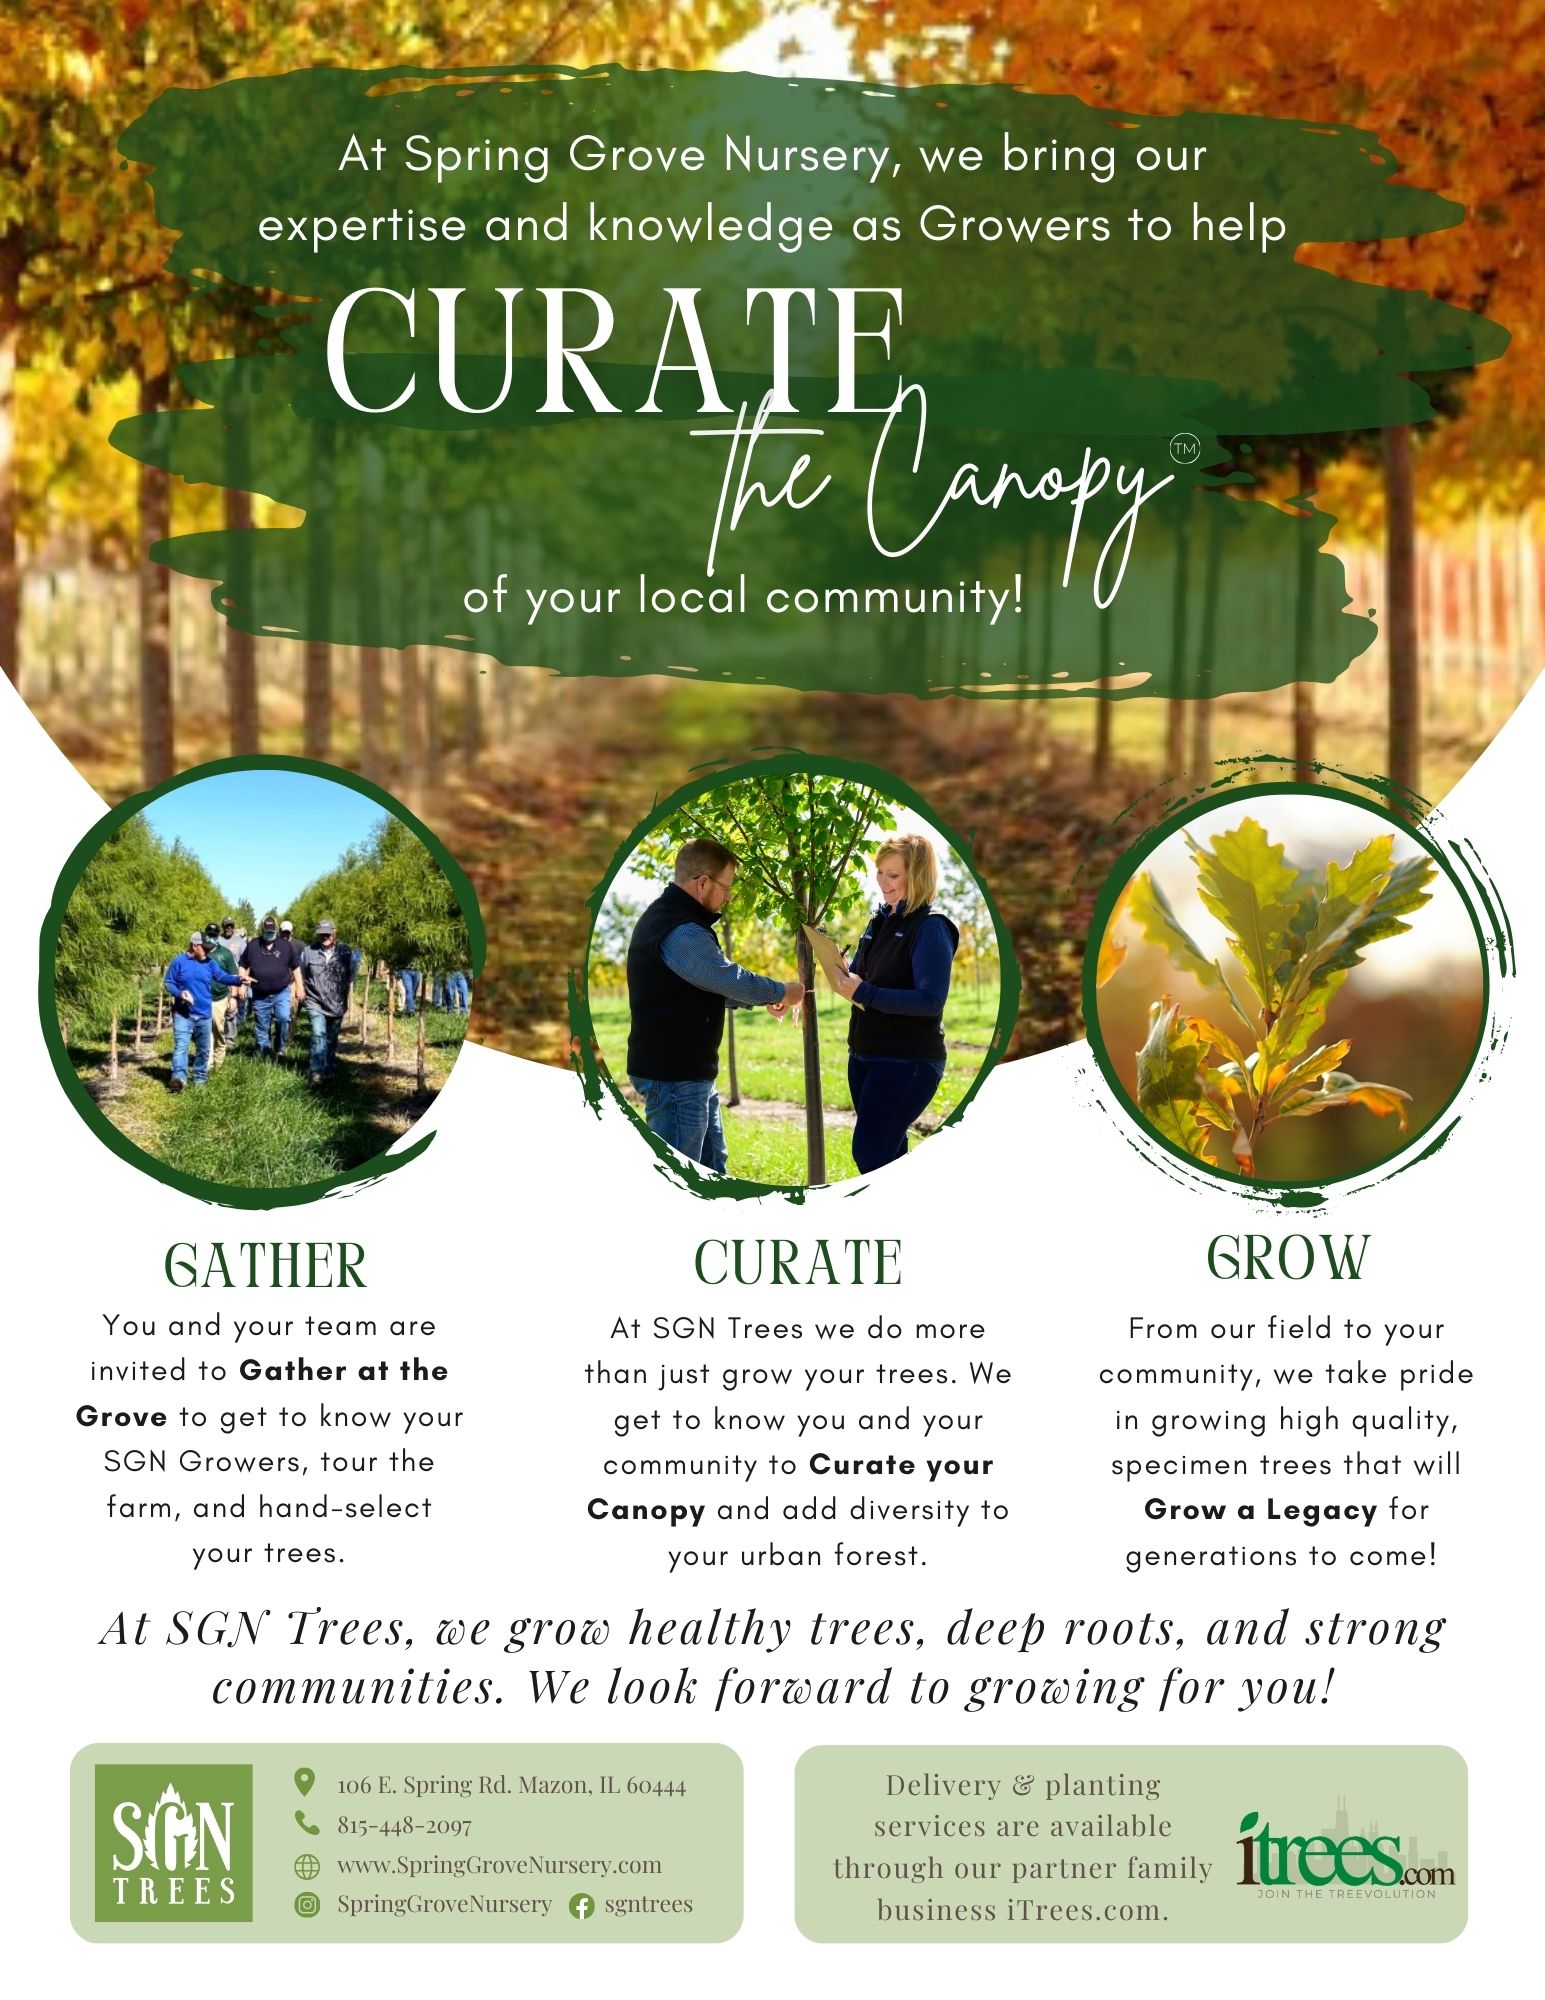 Curate the Canopy™